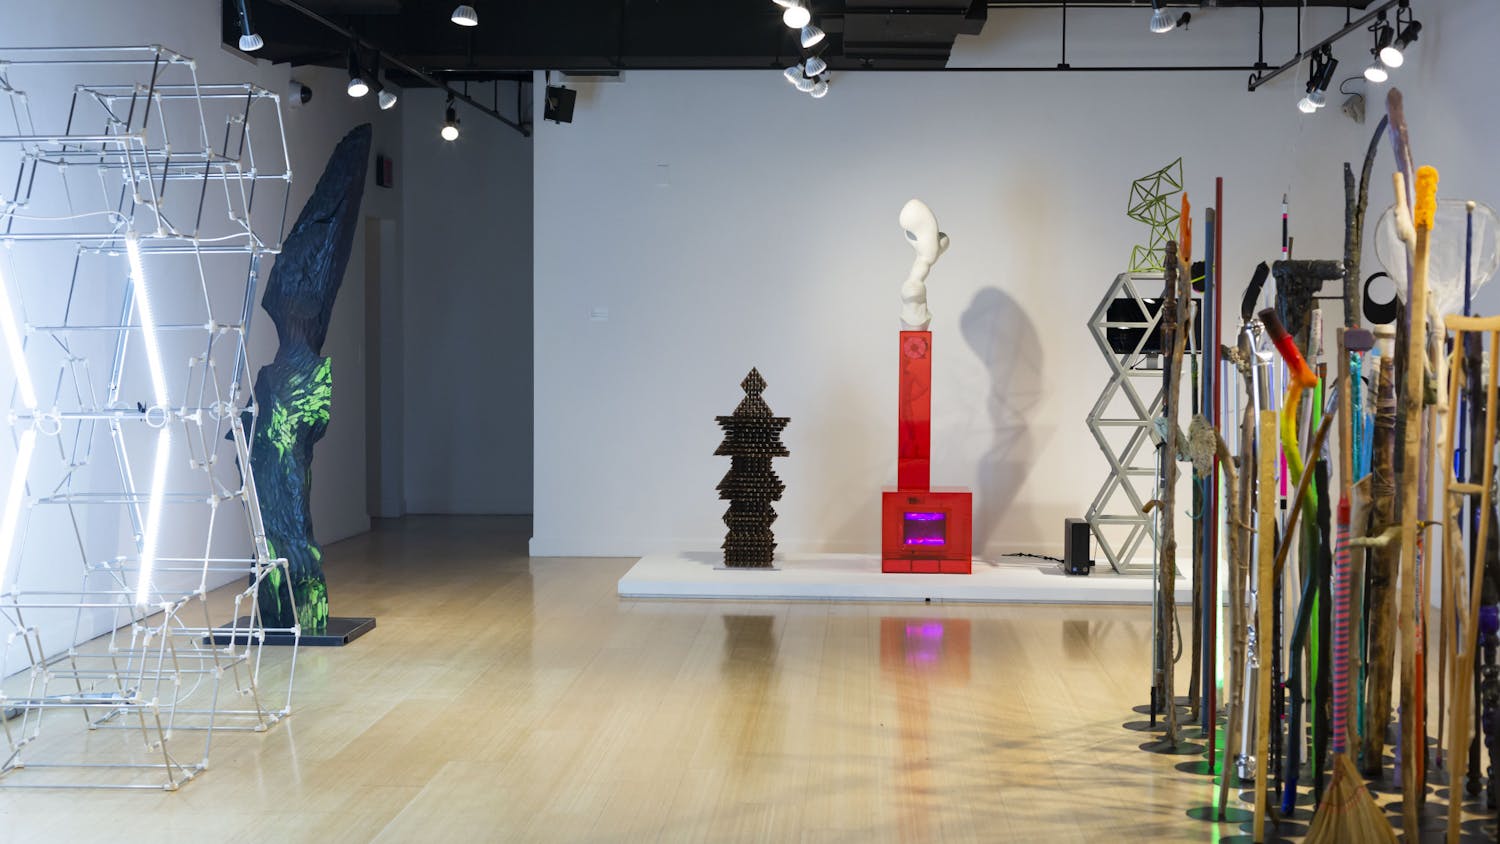 Sculptures from Eli Kessler and Christopher Mahonski on display during the Voyage of Life Exhibit in the McMaster Gallery. The exhibit is taking place from Oct. 24 to Nov. 29, 2022.